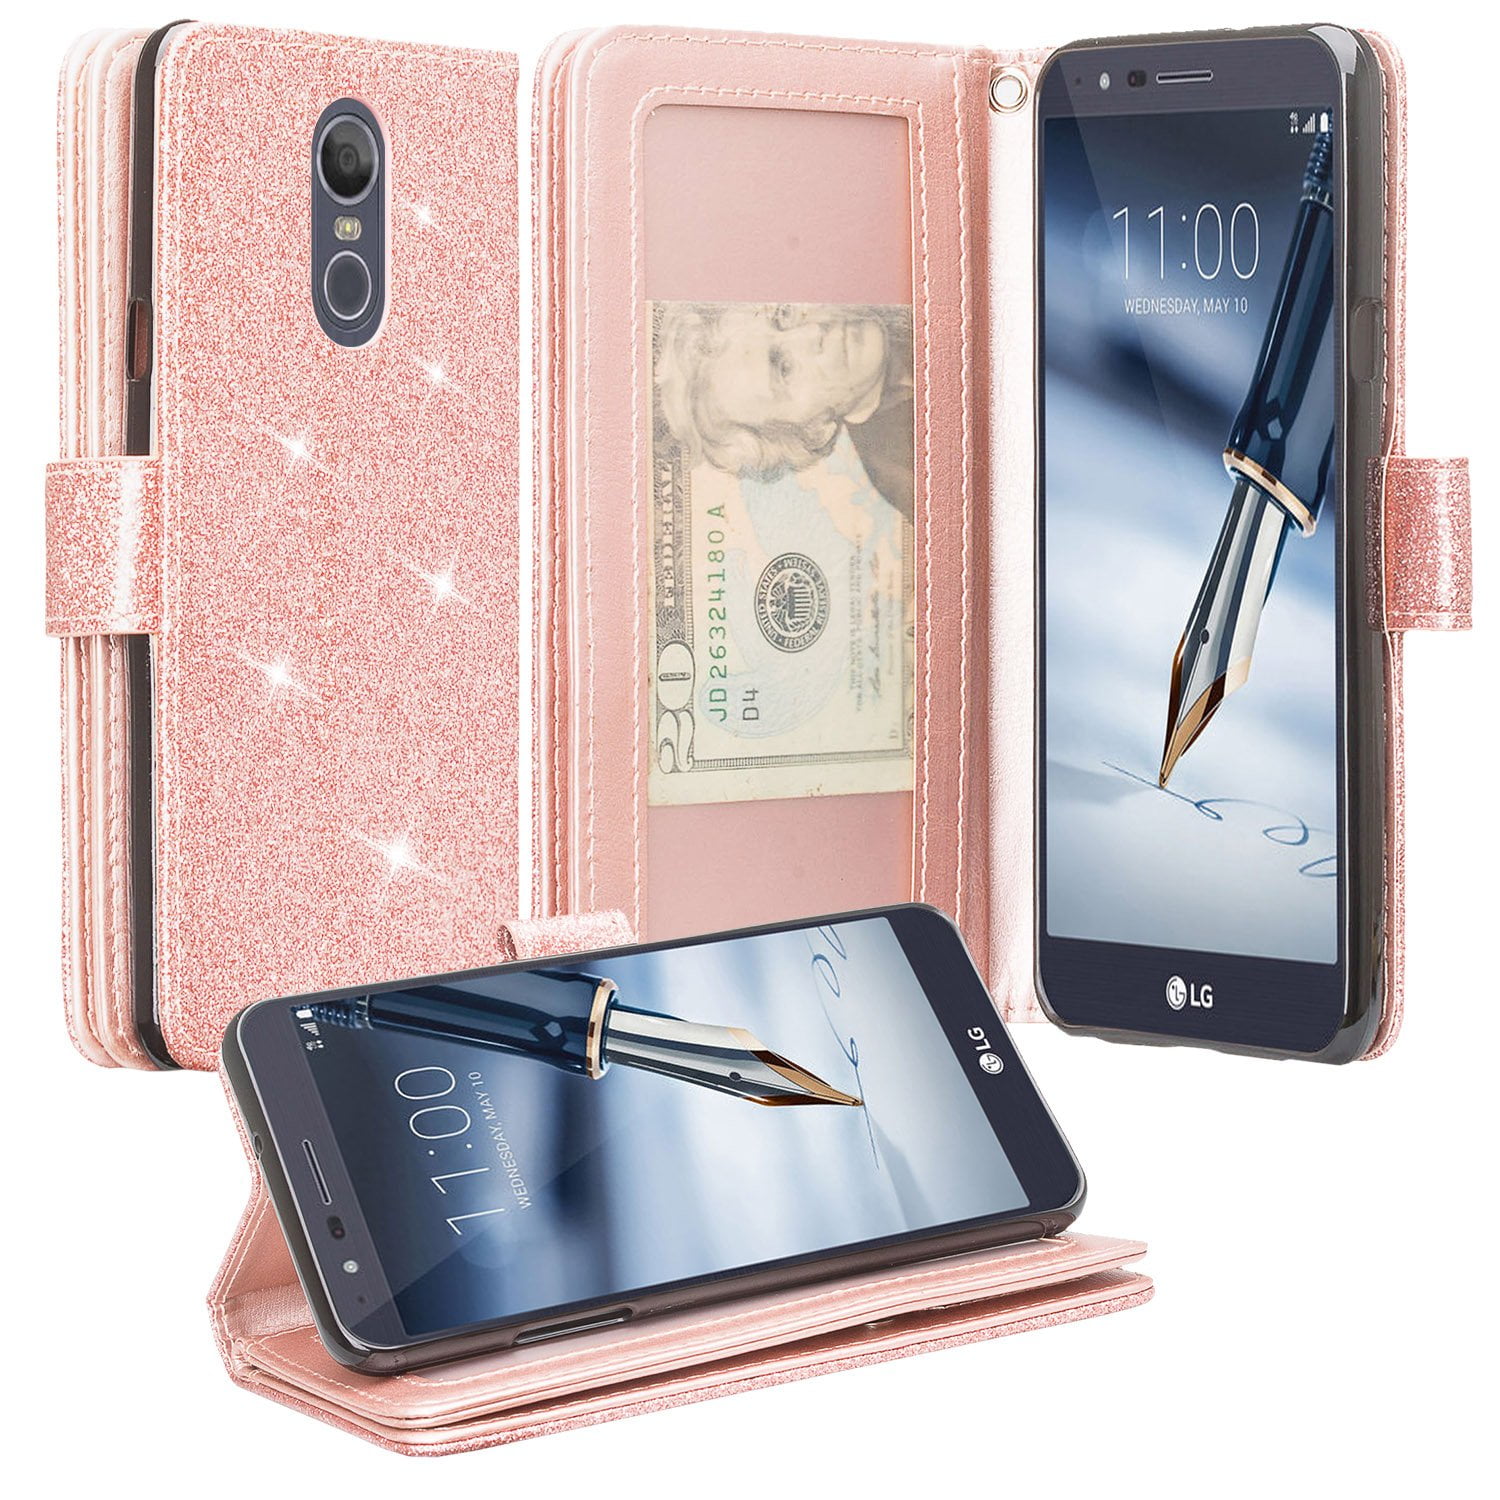 LG Stylo 4 Case,LG Q Stylus Case,LG Stylo 4 Plus/LG Stylus 4 Case,Magnetic Buckle PU Leather Wrist Strap Wallet Case with Card Slots for LG Stylo 4 